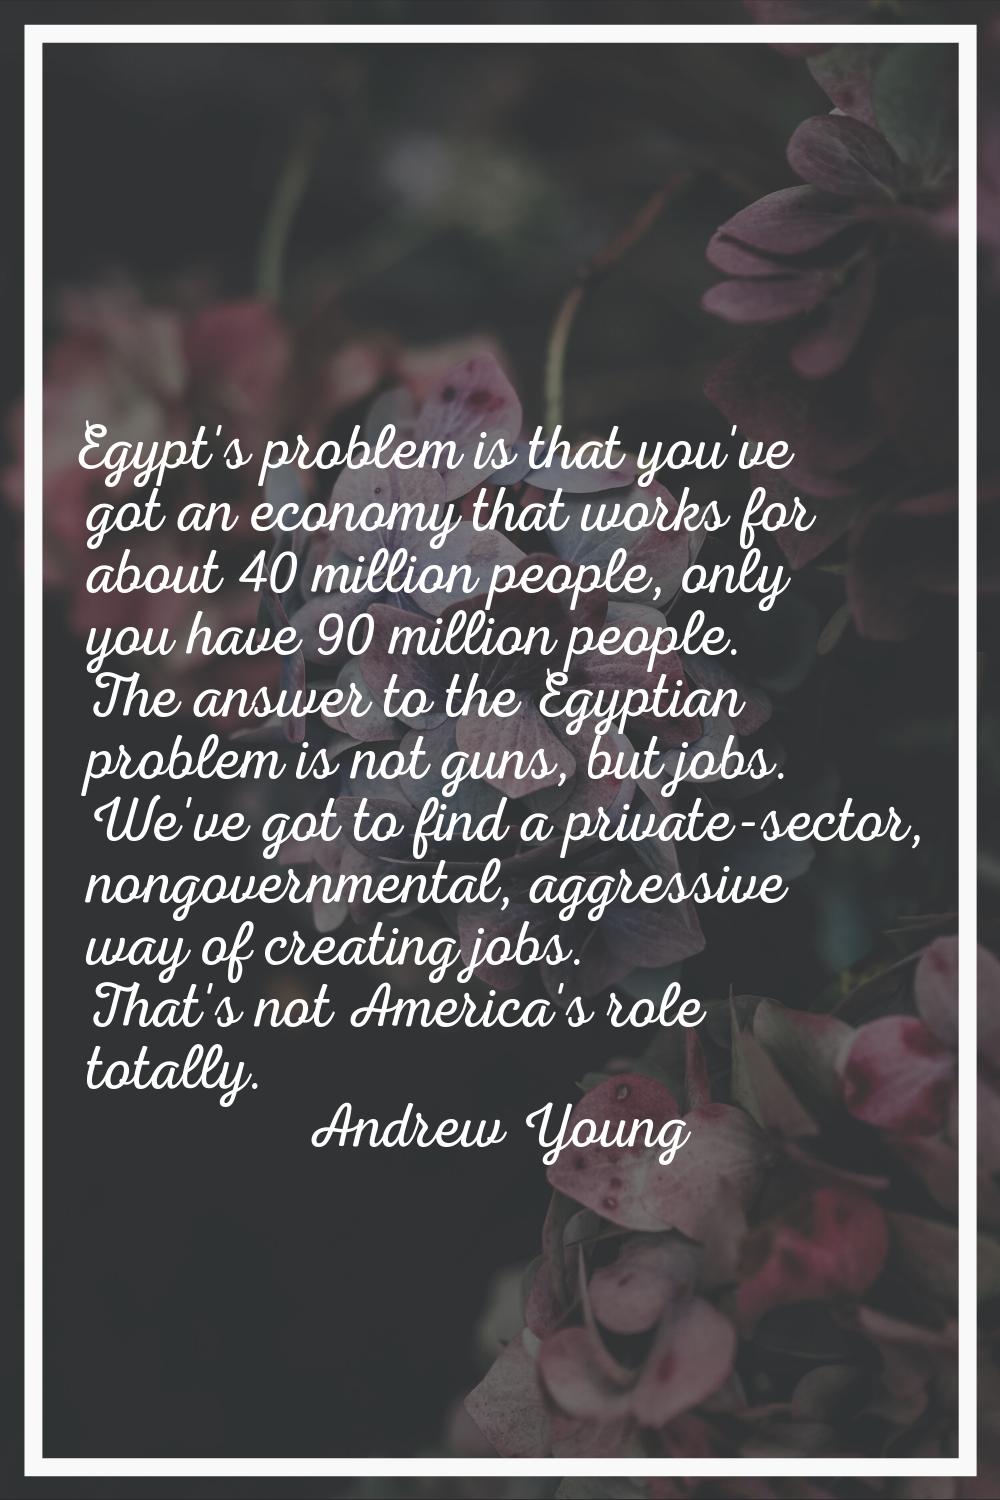 Egypt's problem is that you've got an economy that works for about 40 million people, only you have